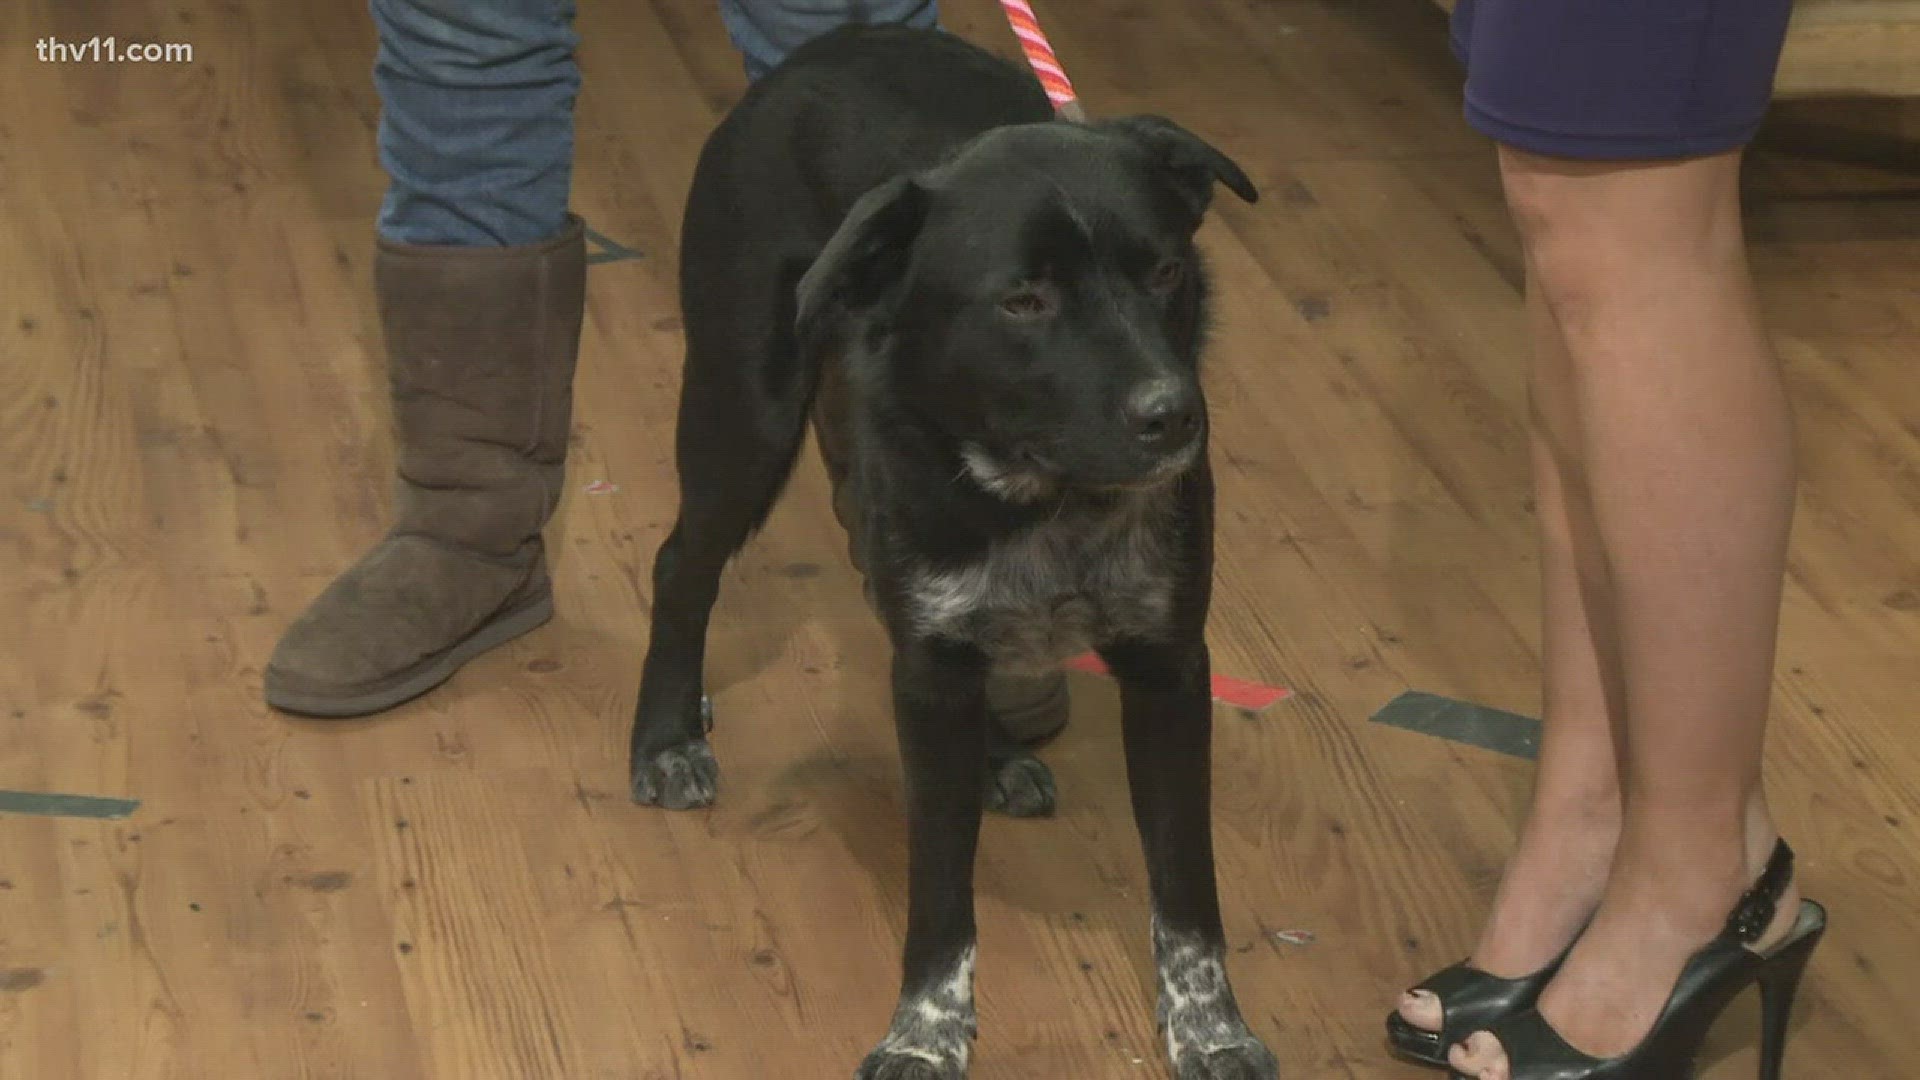 Betsy Robb from Friends of the Animal Village joined THV11 This Morning with Chief